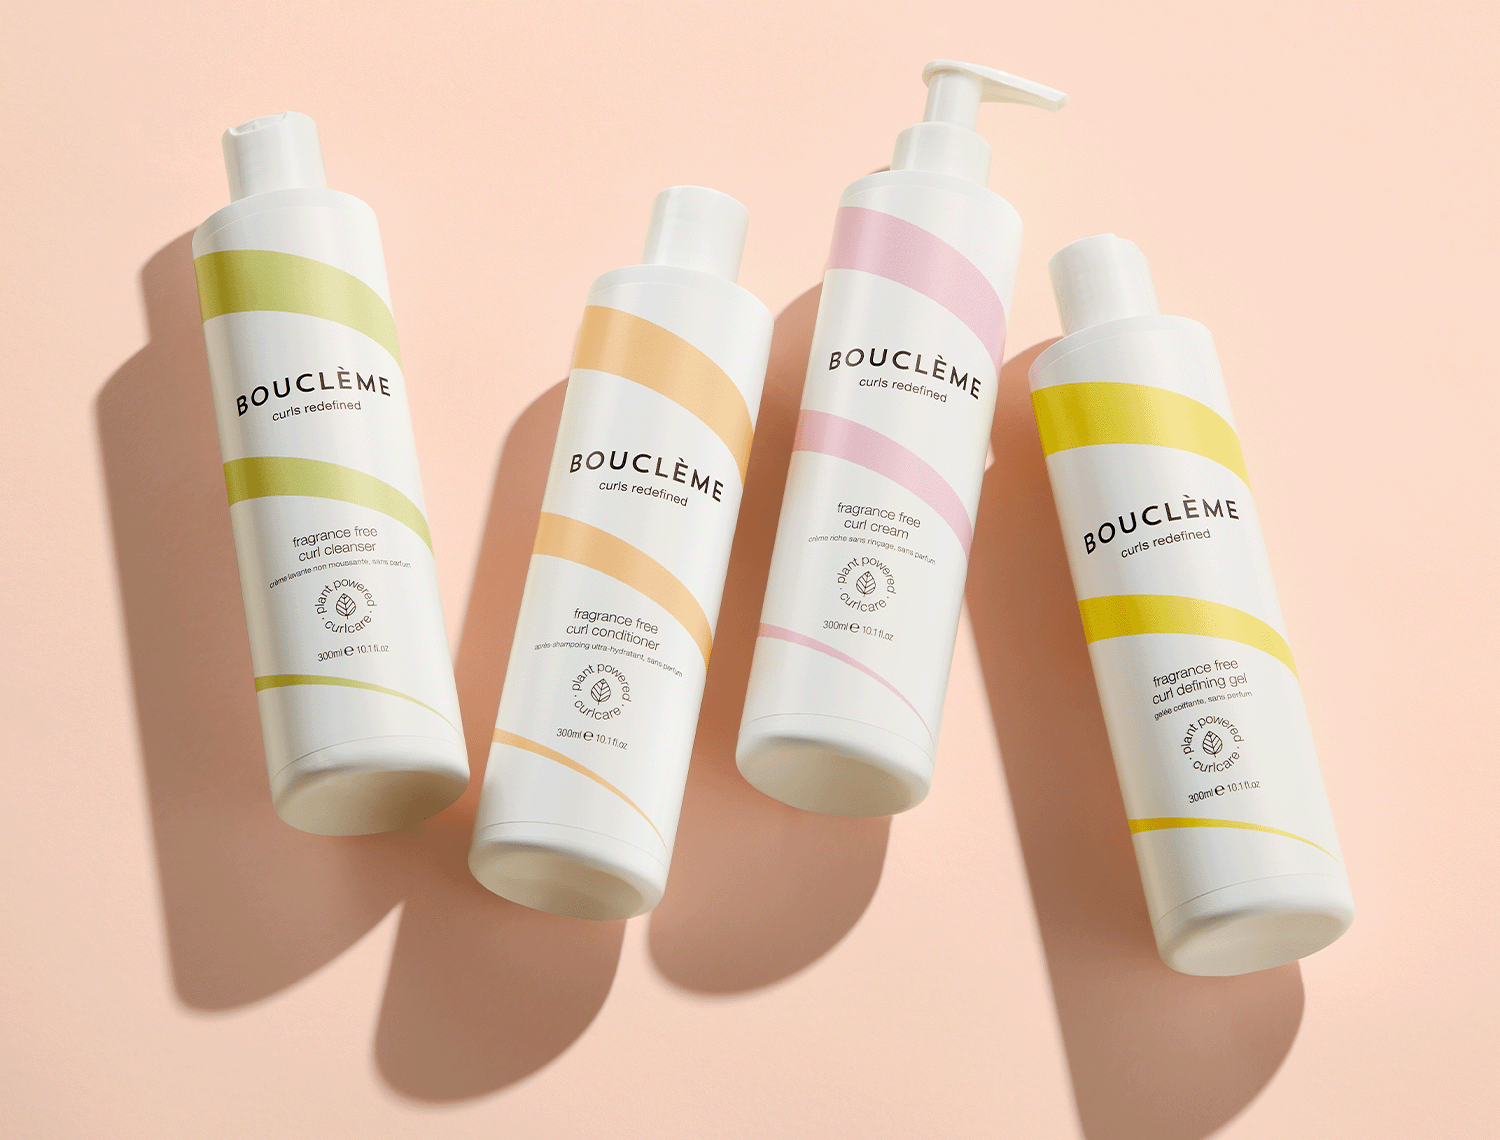 four bottles of Bouclème's range of fragrance free products for curly hair